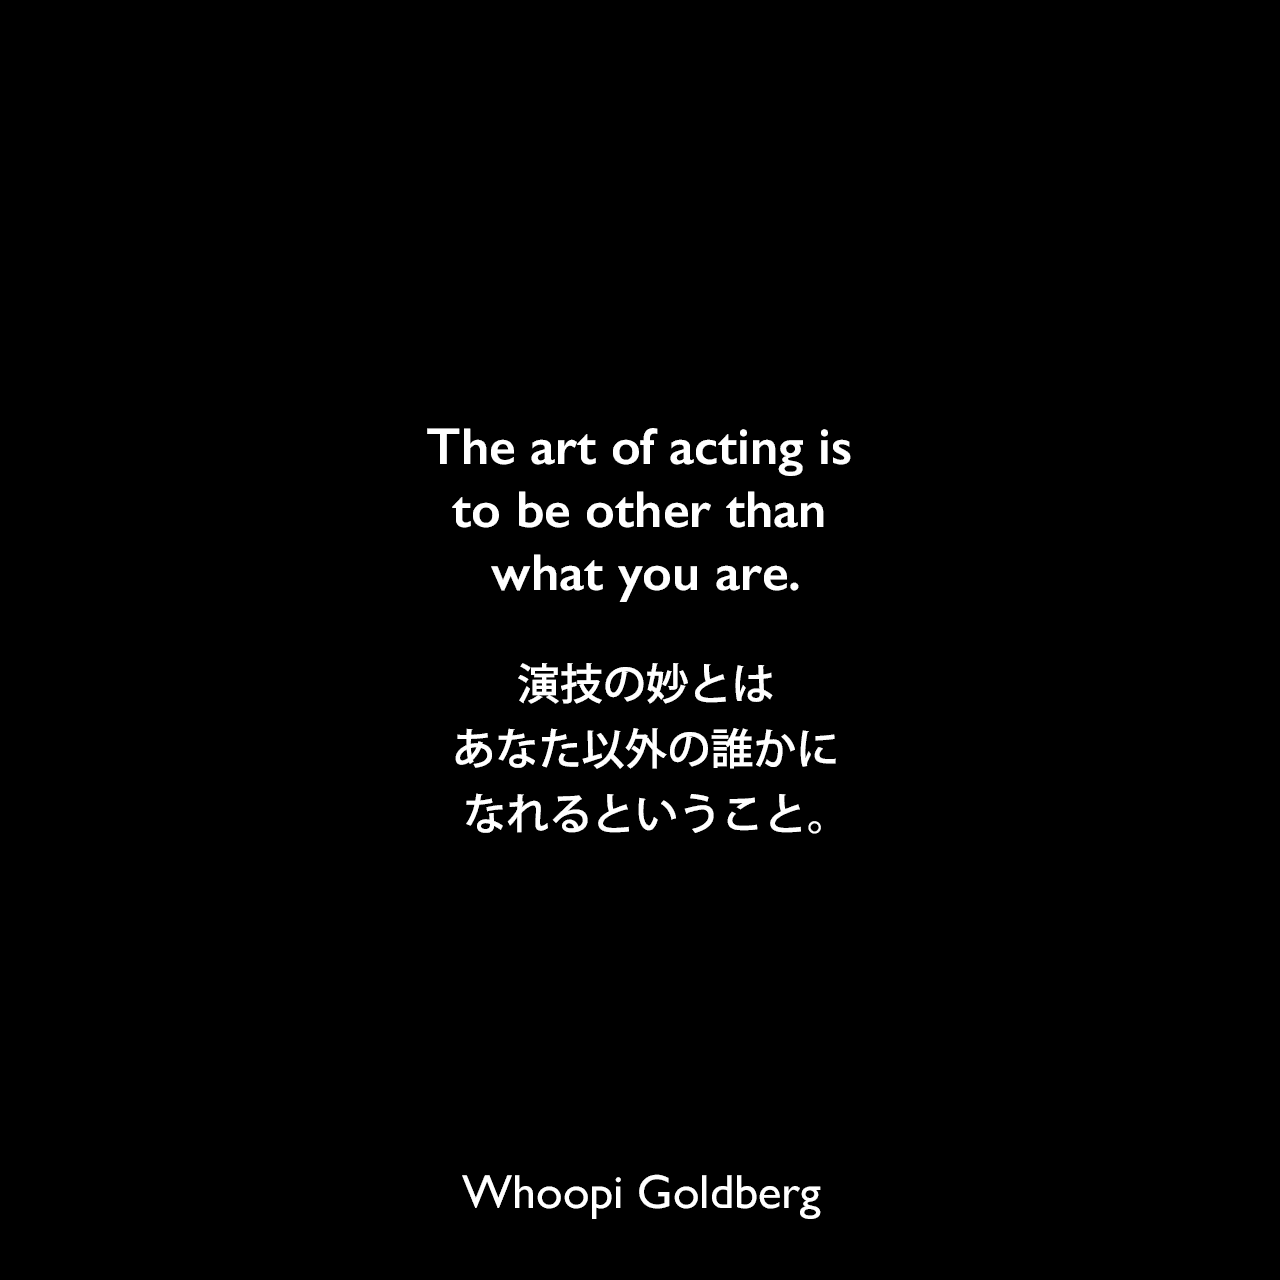 The art of acting is to be other than what you are.演技の妙とはあなた以外の誰かになれるということ。Whoopi Goldberg